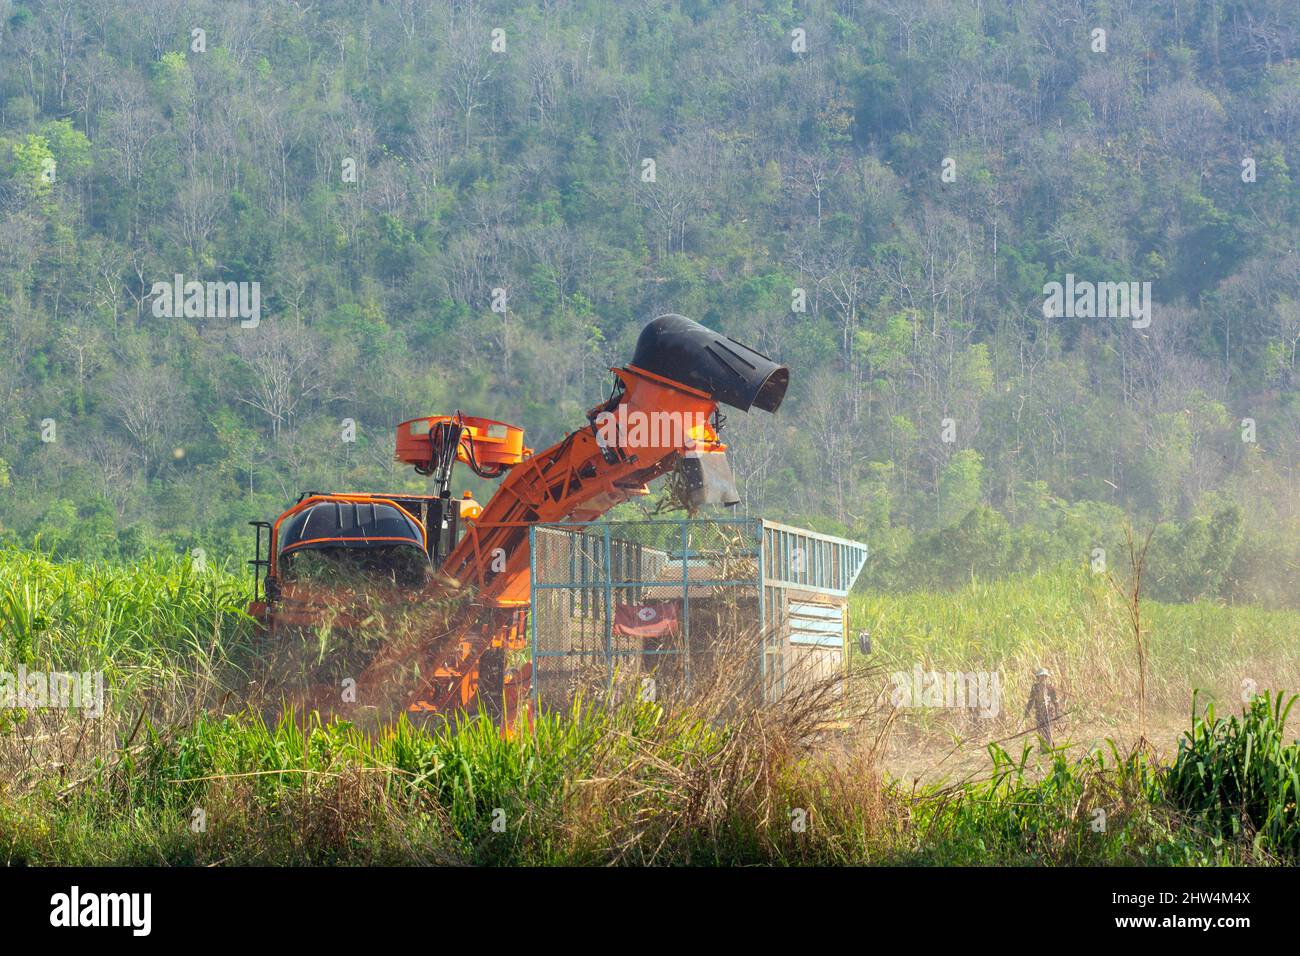 Sugar cane harvesting on agricultural areas that are connected to natural forests. Stock Photo